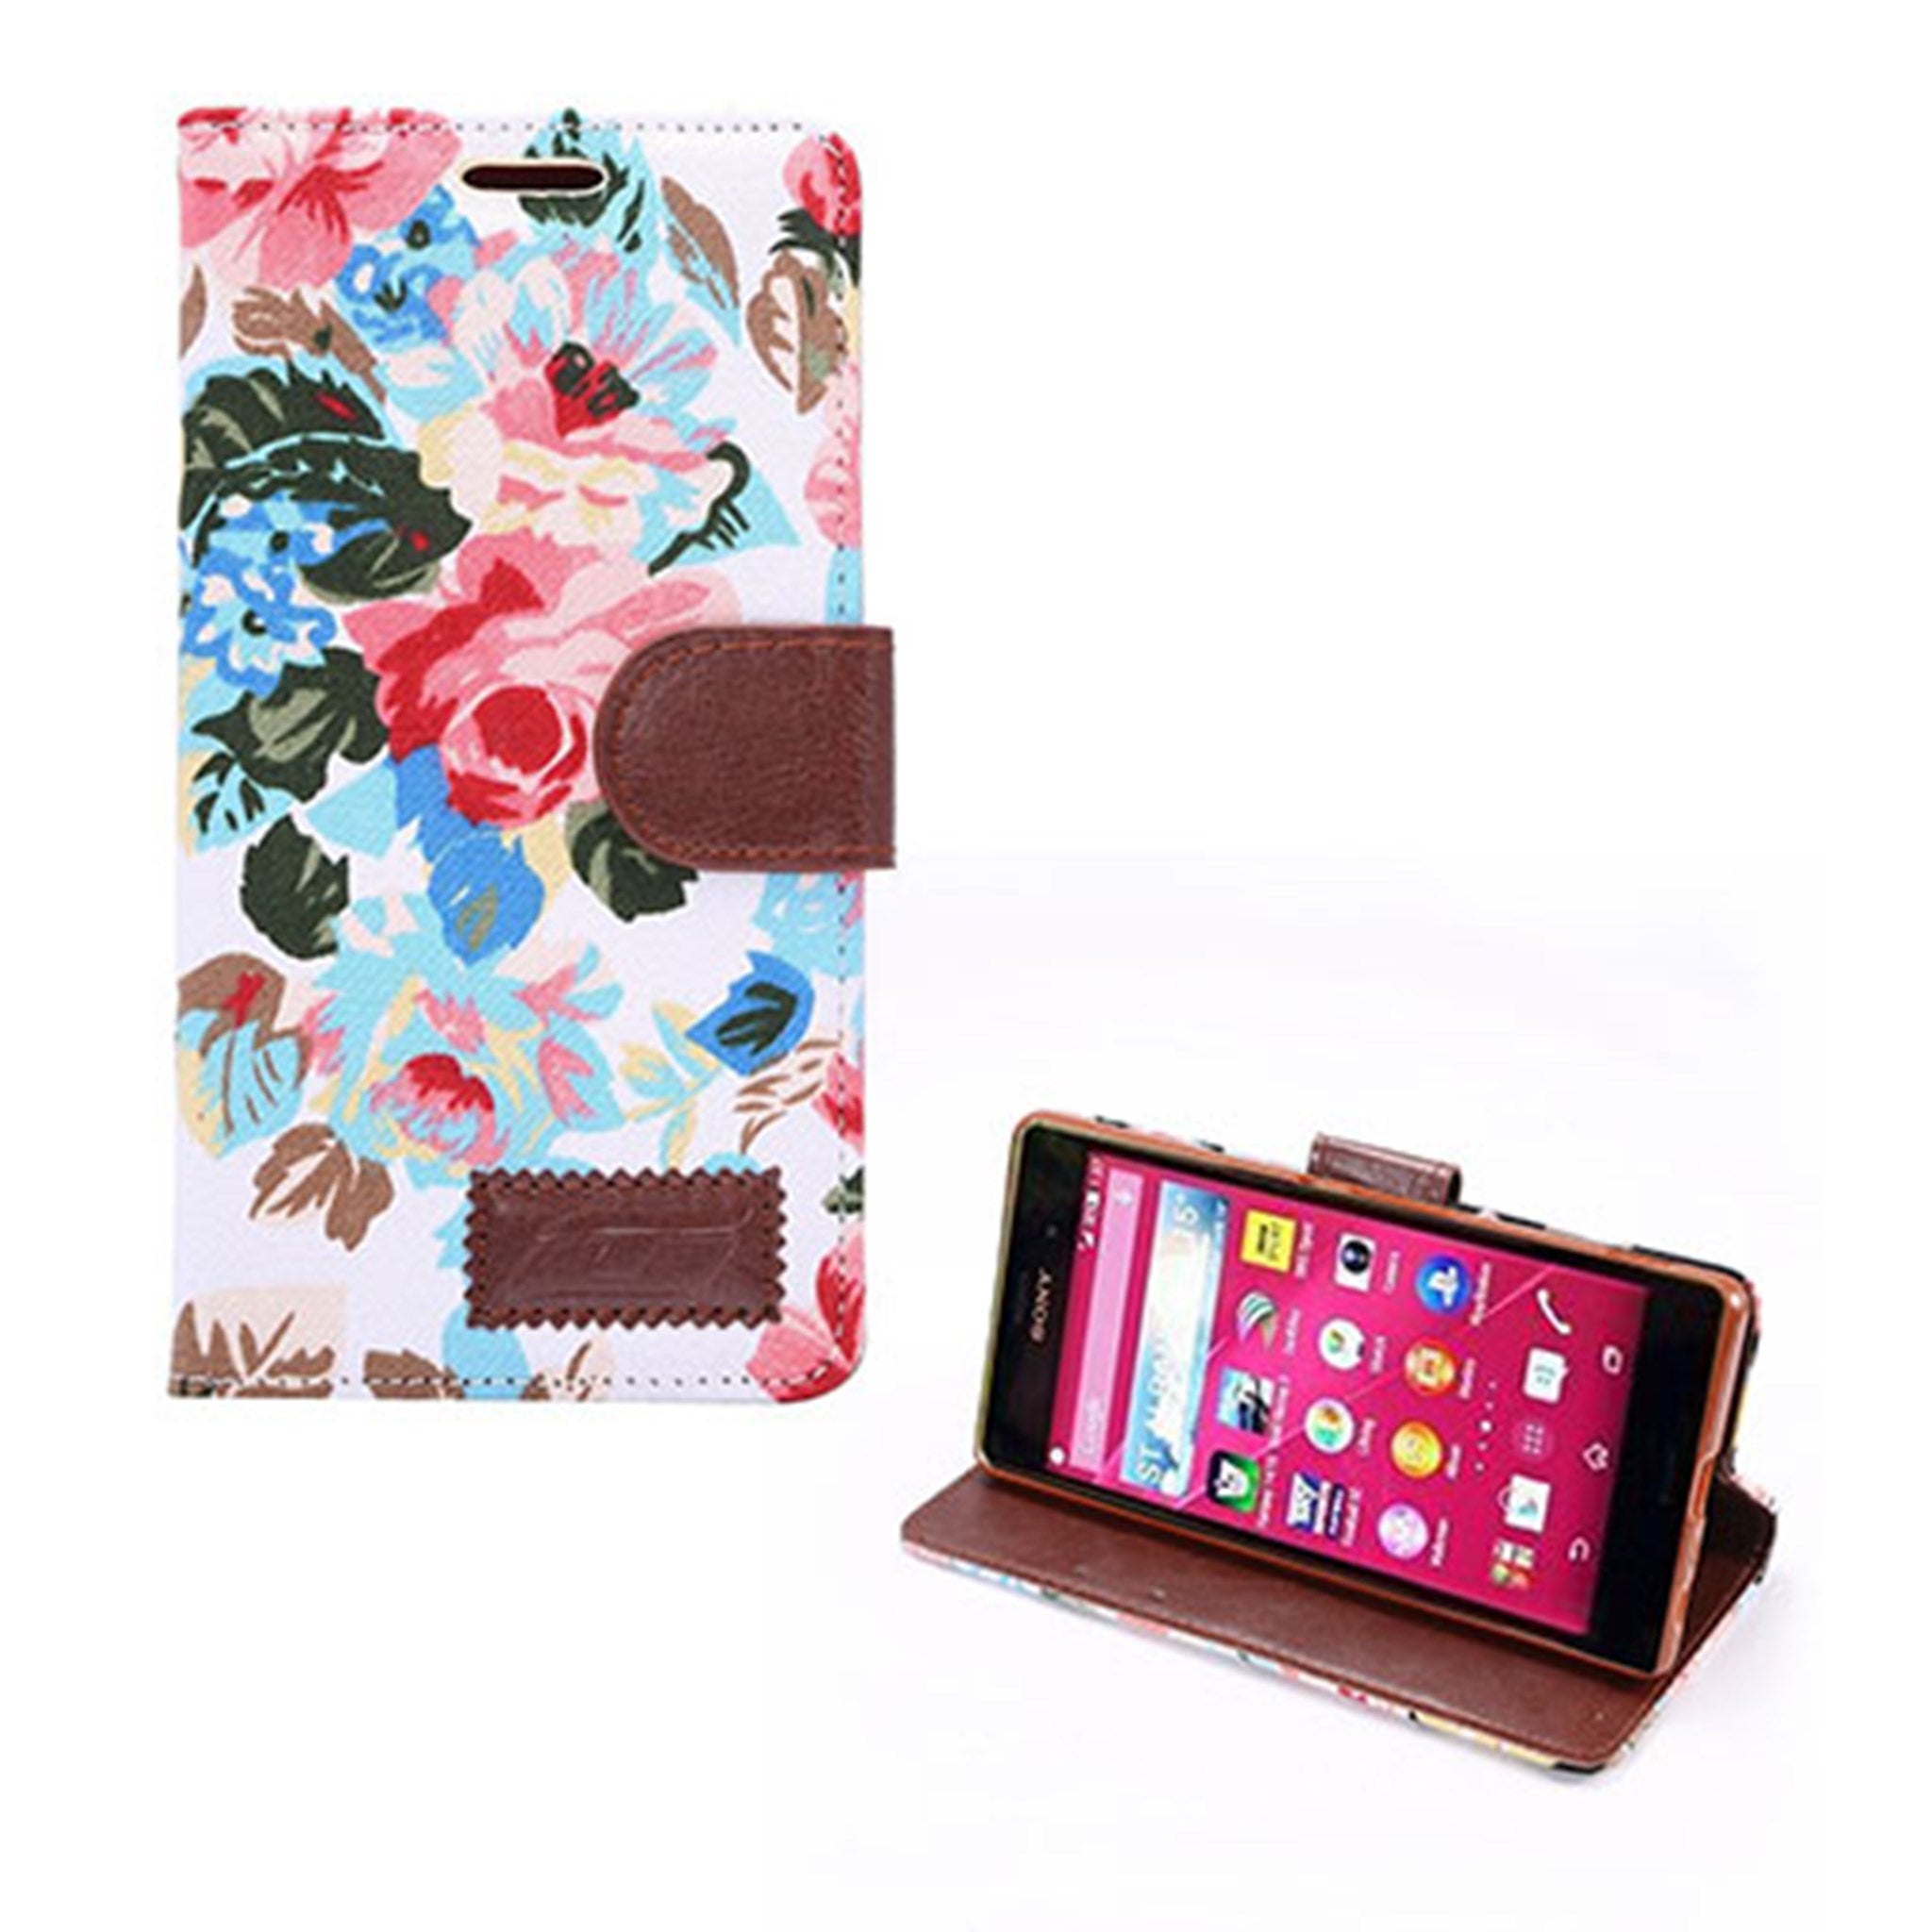 Sony Xperia Z3+ Leather Flip Case With Card Holder - White Flower Pattern